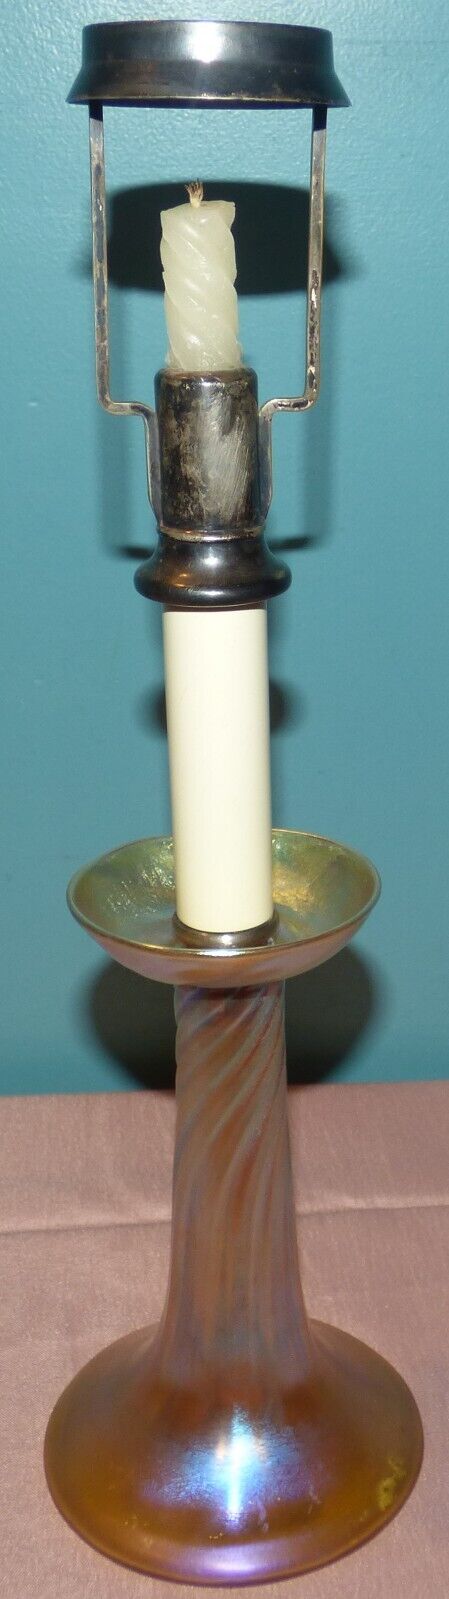 L.C. Tiffany Favrile Gold Glass Candle Lamp Base, No Shade